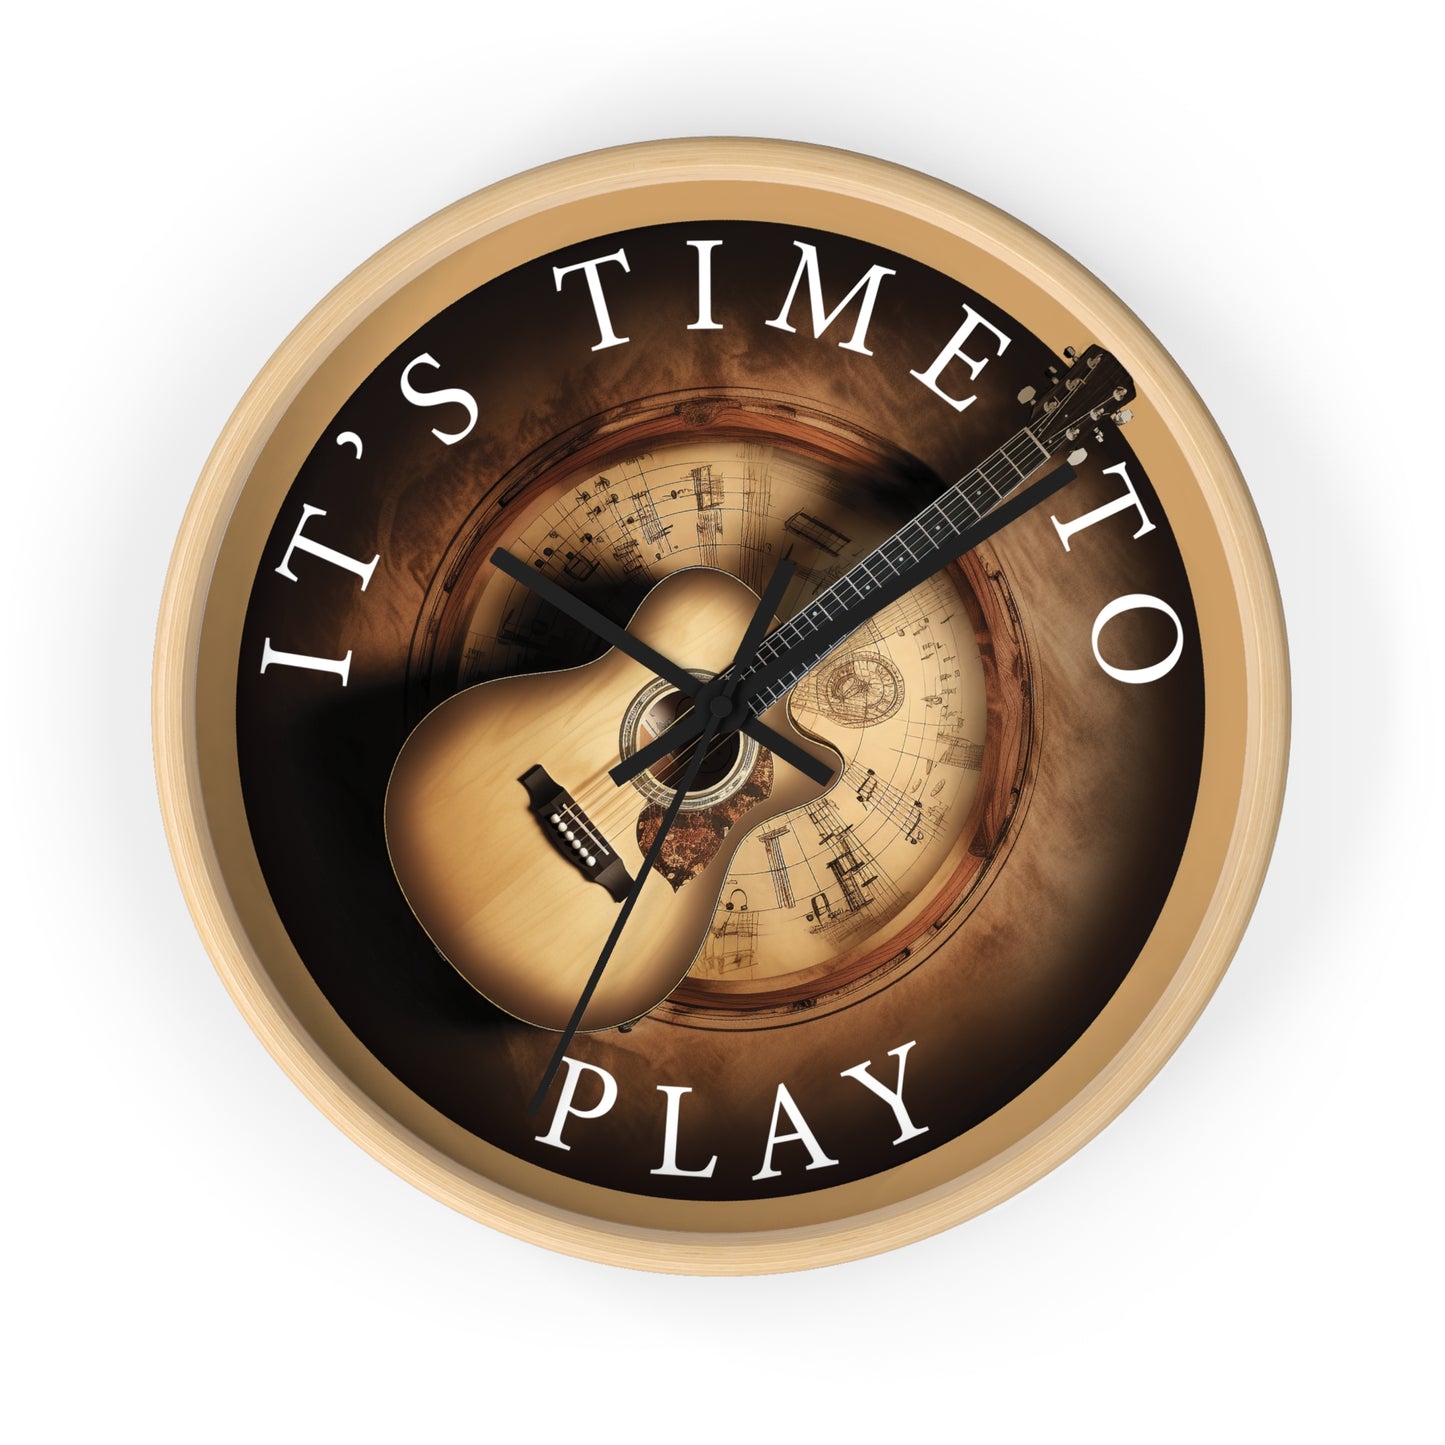 It's TIME to PLAY  music-themed 10" Wall Clock, with acoustic guitar in a surrealistic design, 2" black or light wood frame and plexiglass